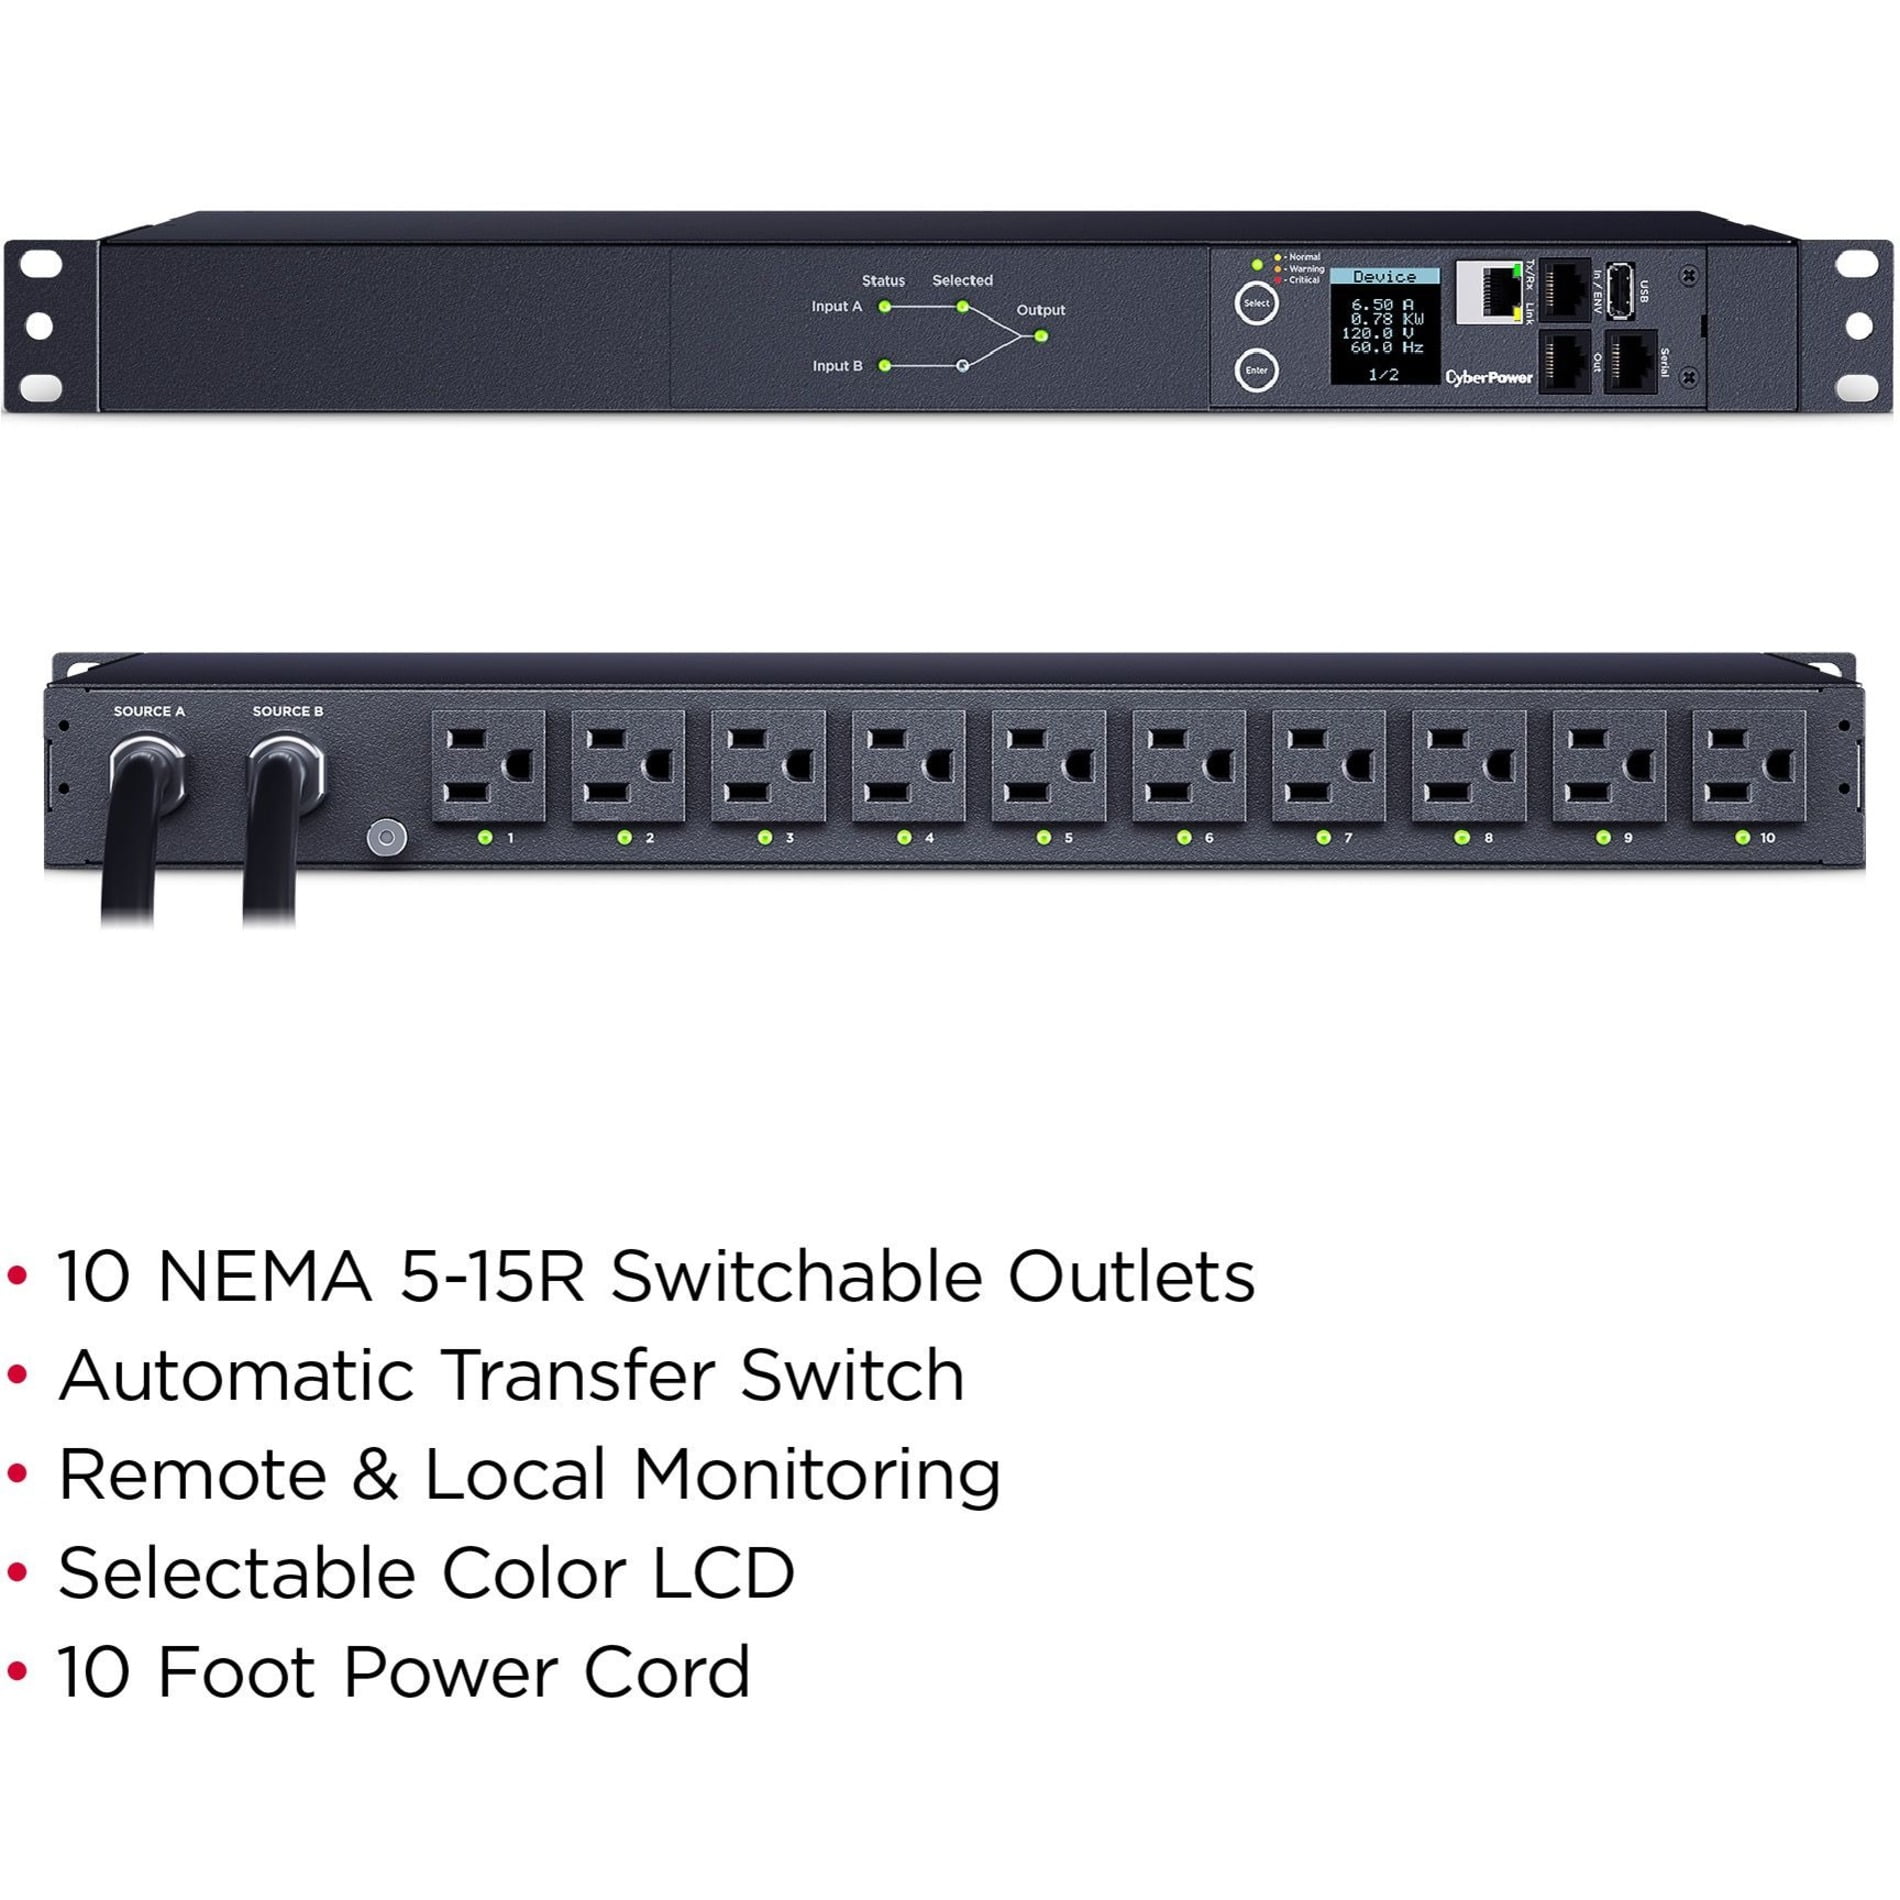 1U Rackmount 10 Outlets 100-120V/20A CyberPower PDU20SWT10ATNET Switched ATS PDU 